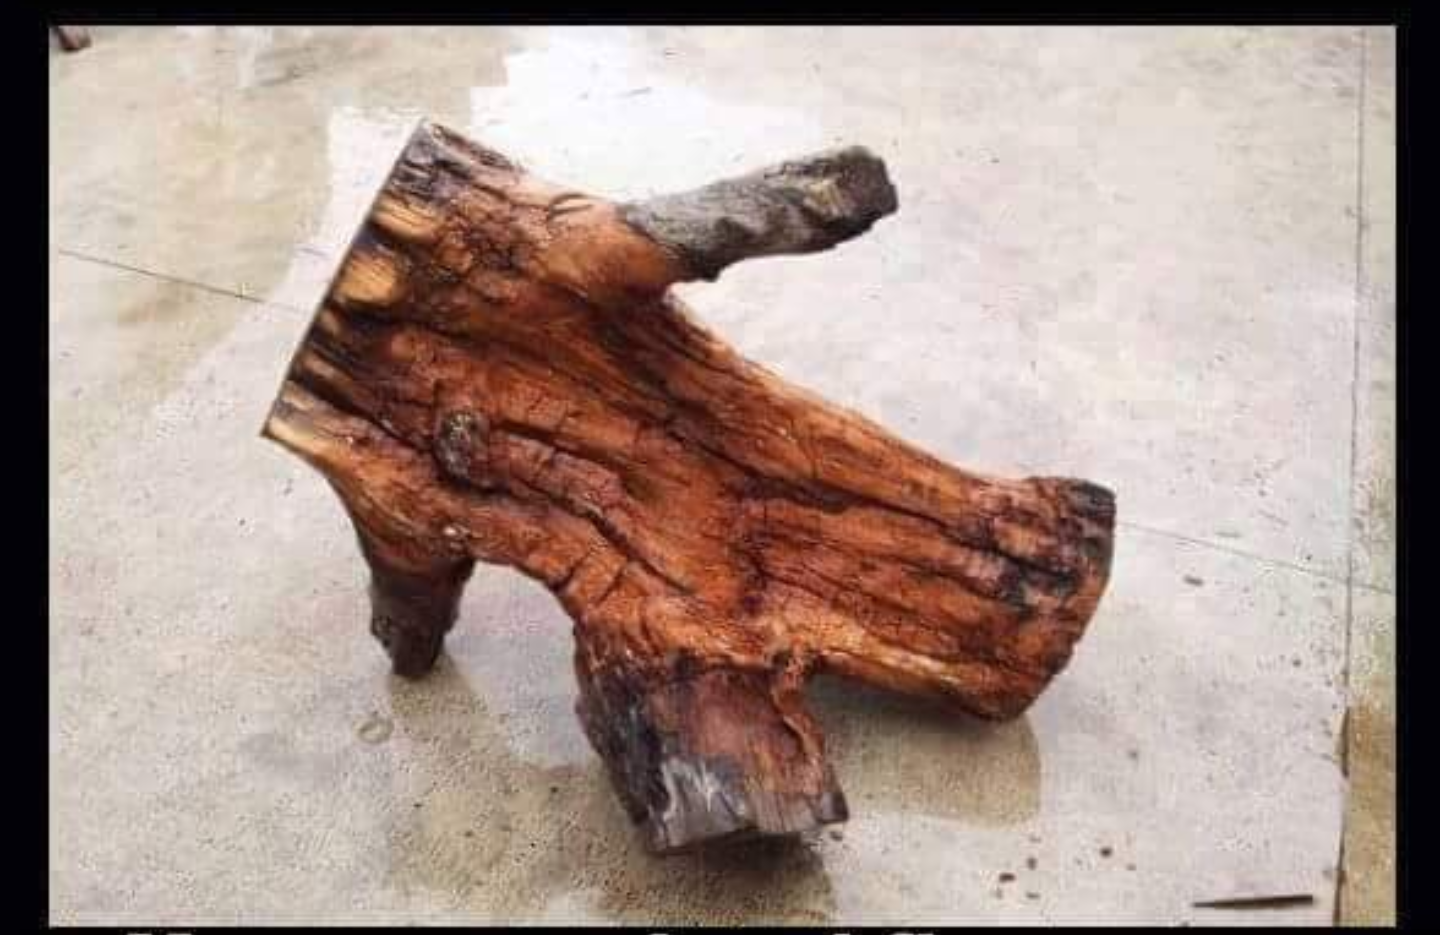 you can be as cool as you want, but yoi'll never be as cool as this breakdancing piece of wood